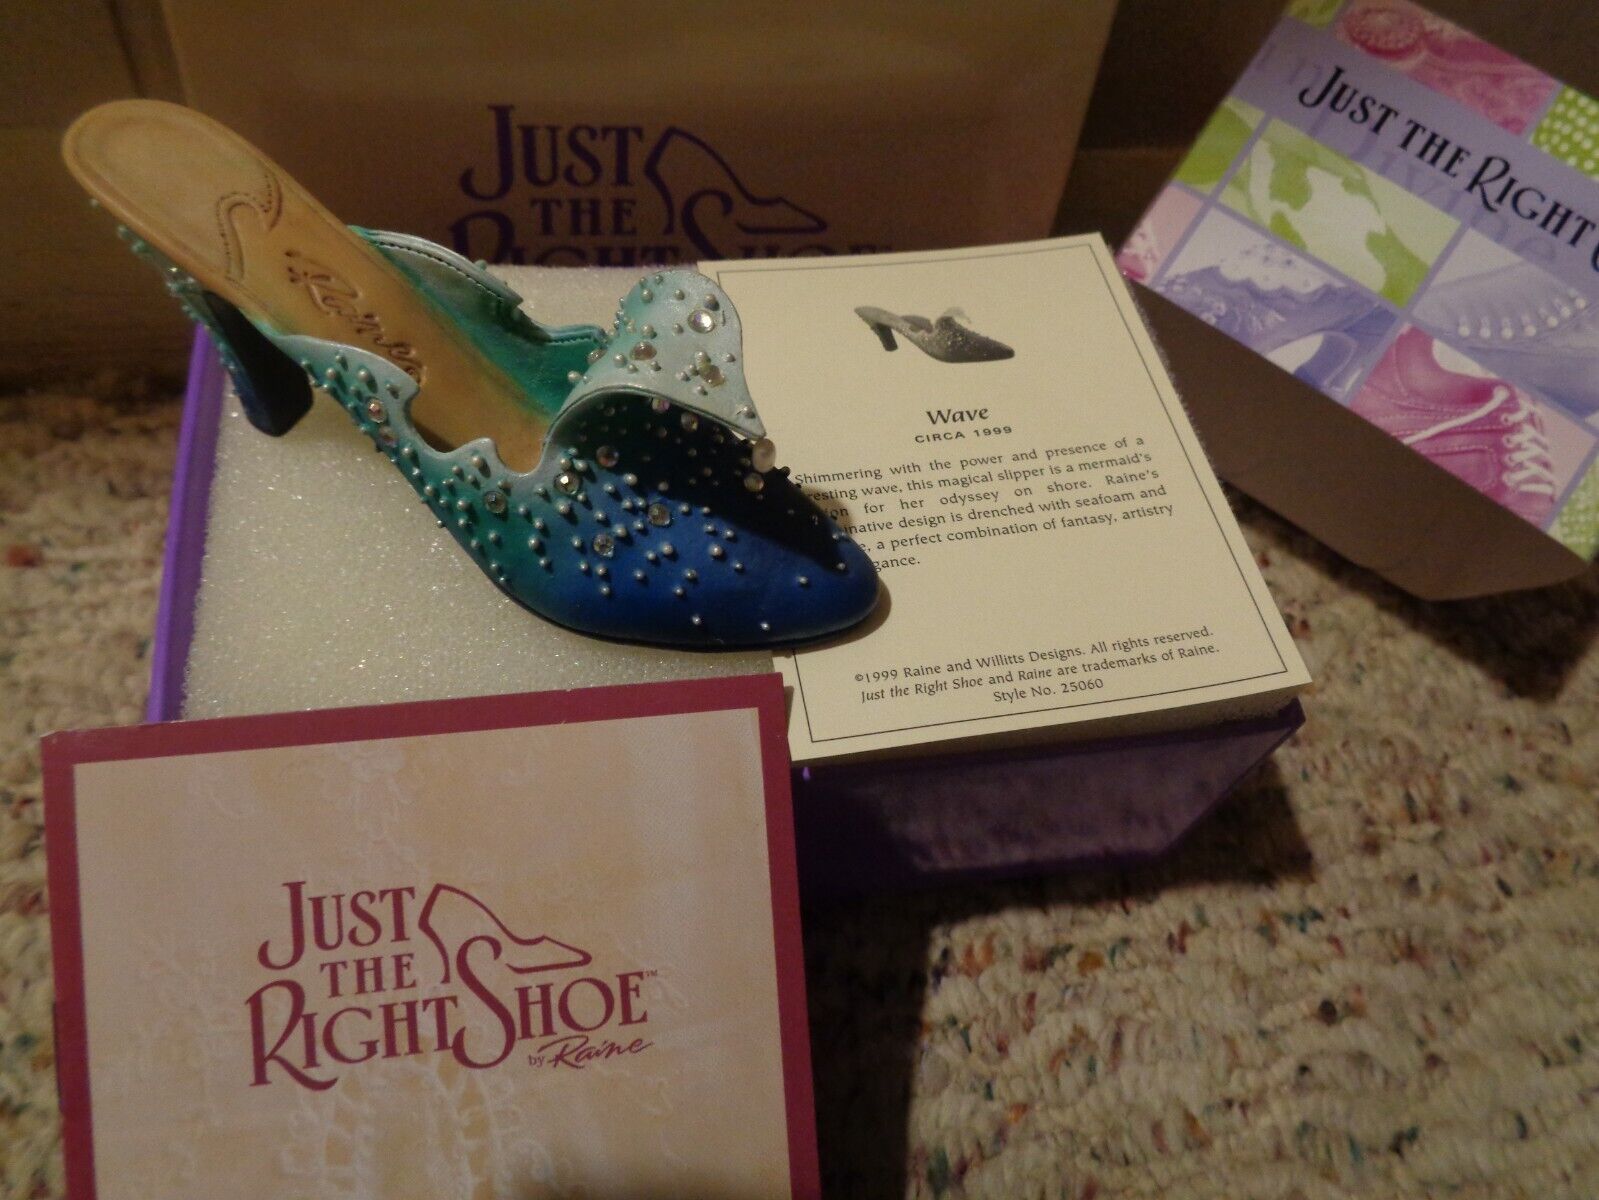 JUST THE RIGHT SHOE - BY RAINE WILLITTS - THE WAVE  - #25060 - COA - NICE SHOE